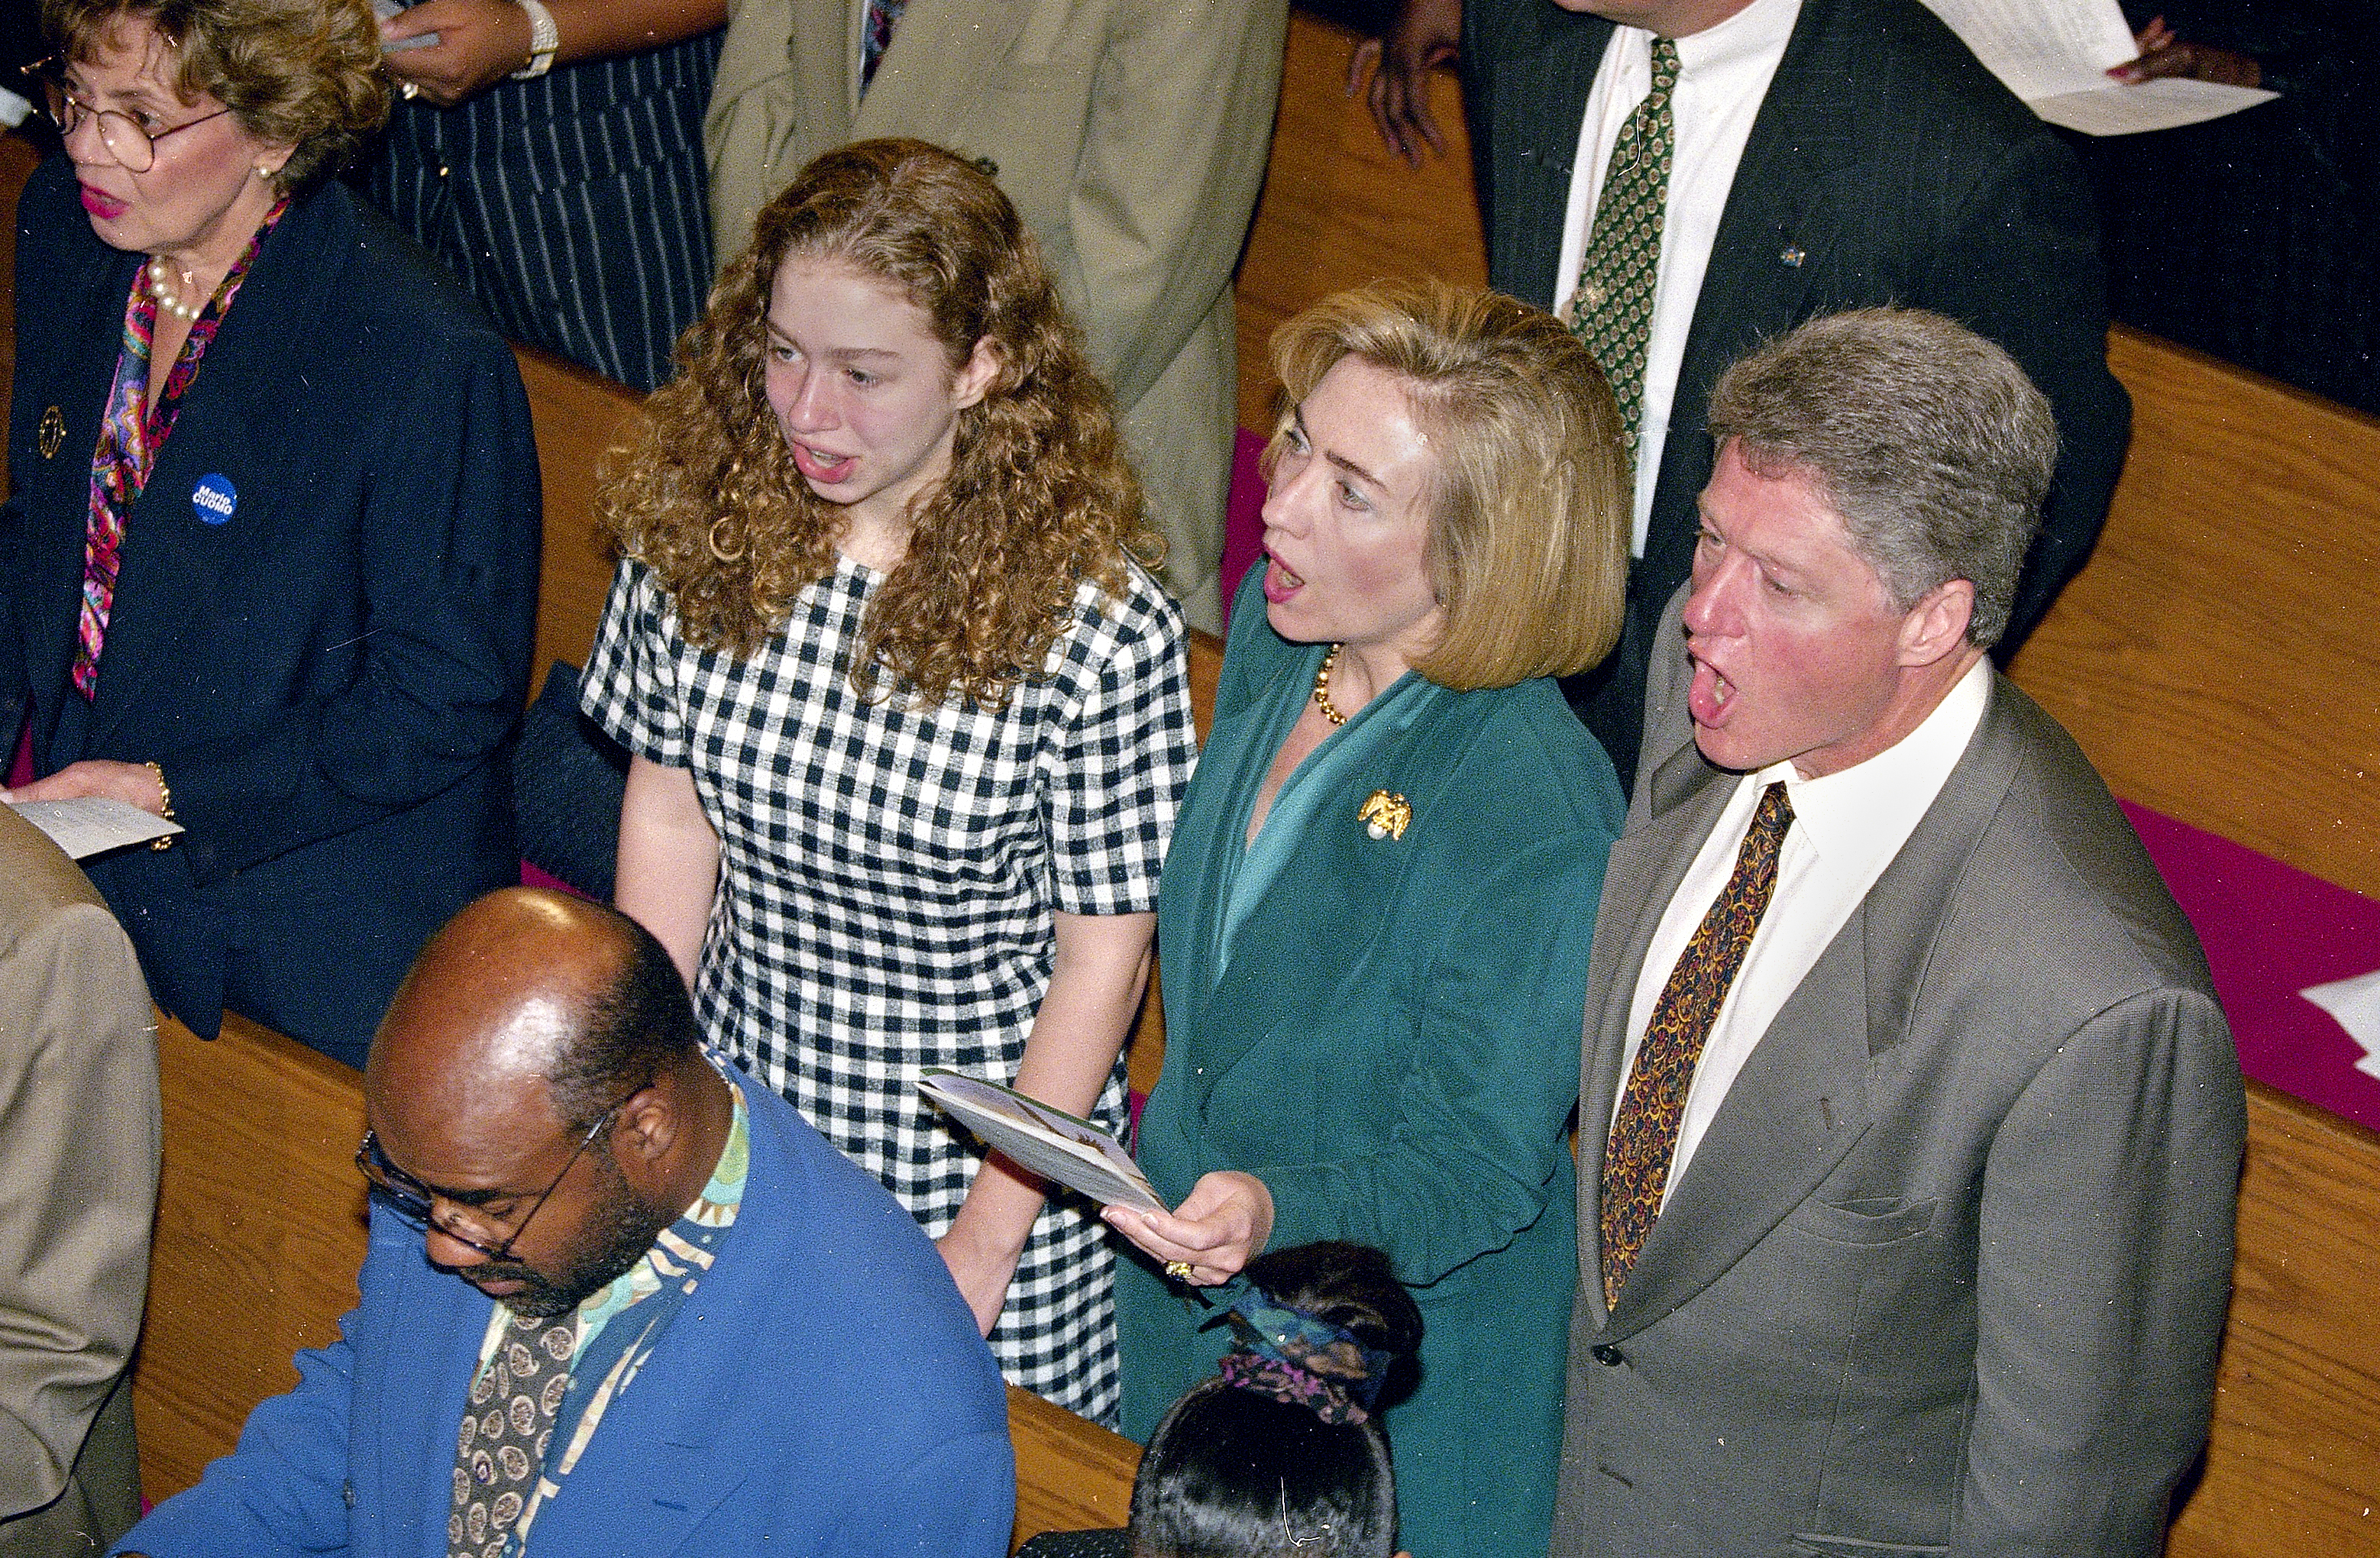 FILE - In this Sept. 25, 1994 file photo, President Bill Clinton, first lady Hillary Rodham Clinton and their daughter, Chelsea, sing a hymn during church services at the Bethel African Methodist Church in the Harlem section of New York. Clinton is a lifelong Methodist. But the Rev. Bill Shillady _ who officiated at Chelsea Clinton's wedding, led a memorial service for Clinton’s mother, Dorothy Rodham, and gave the closing benediction at the Democratic National Convention _ feels that many people don't really know how much her faith "is a daily thing." (Associated Press)